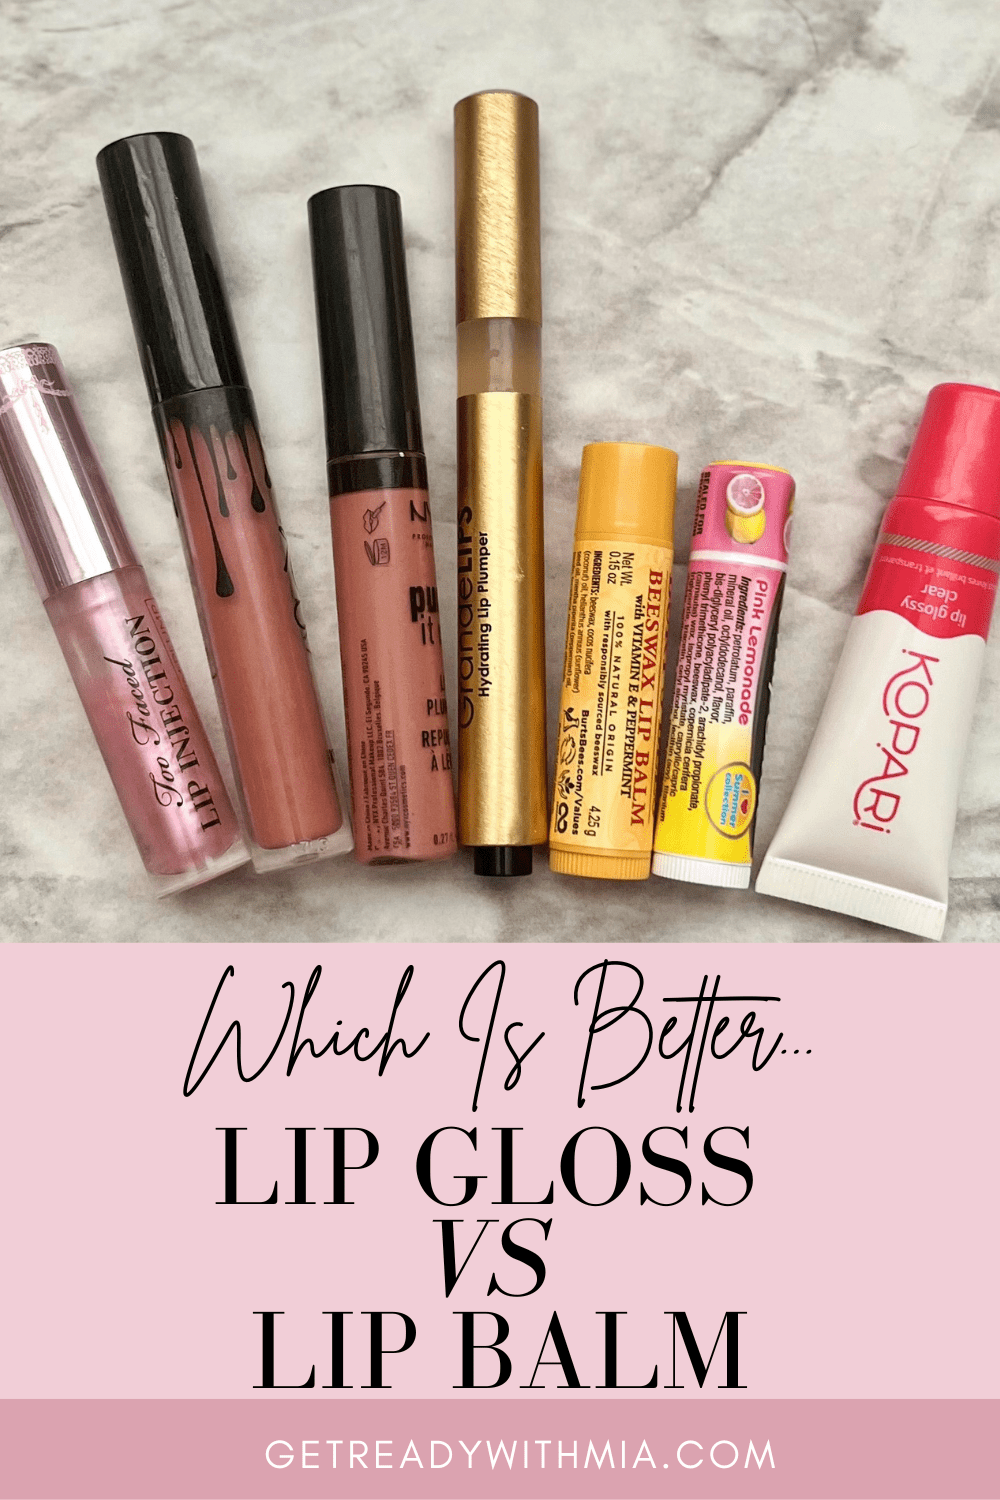 Can lip gloss be used as lip balm